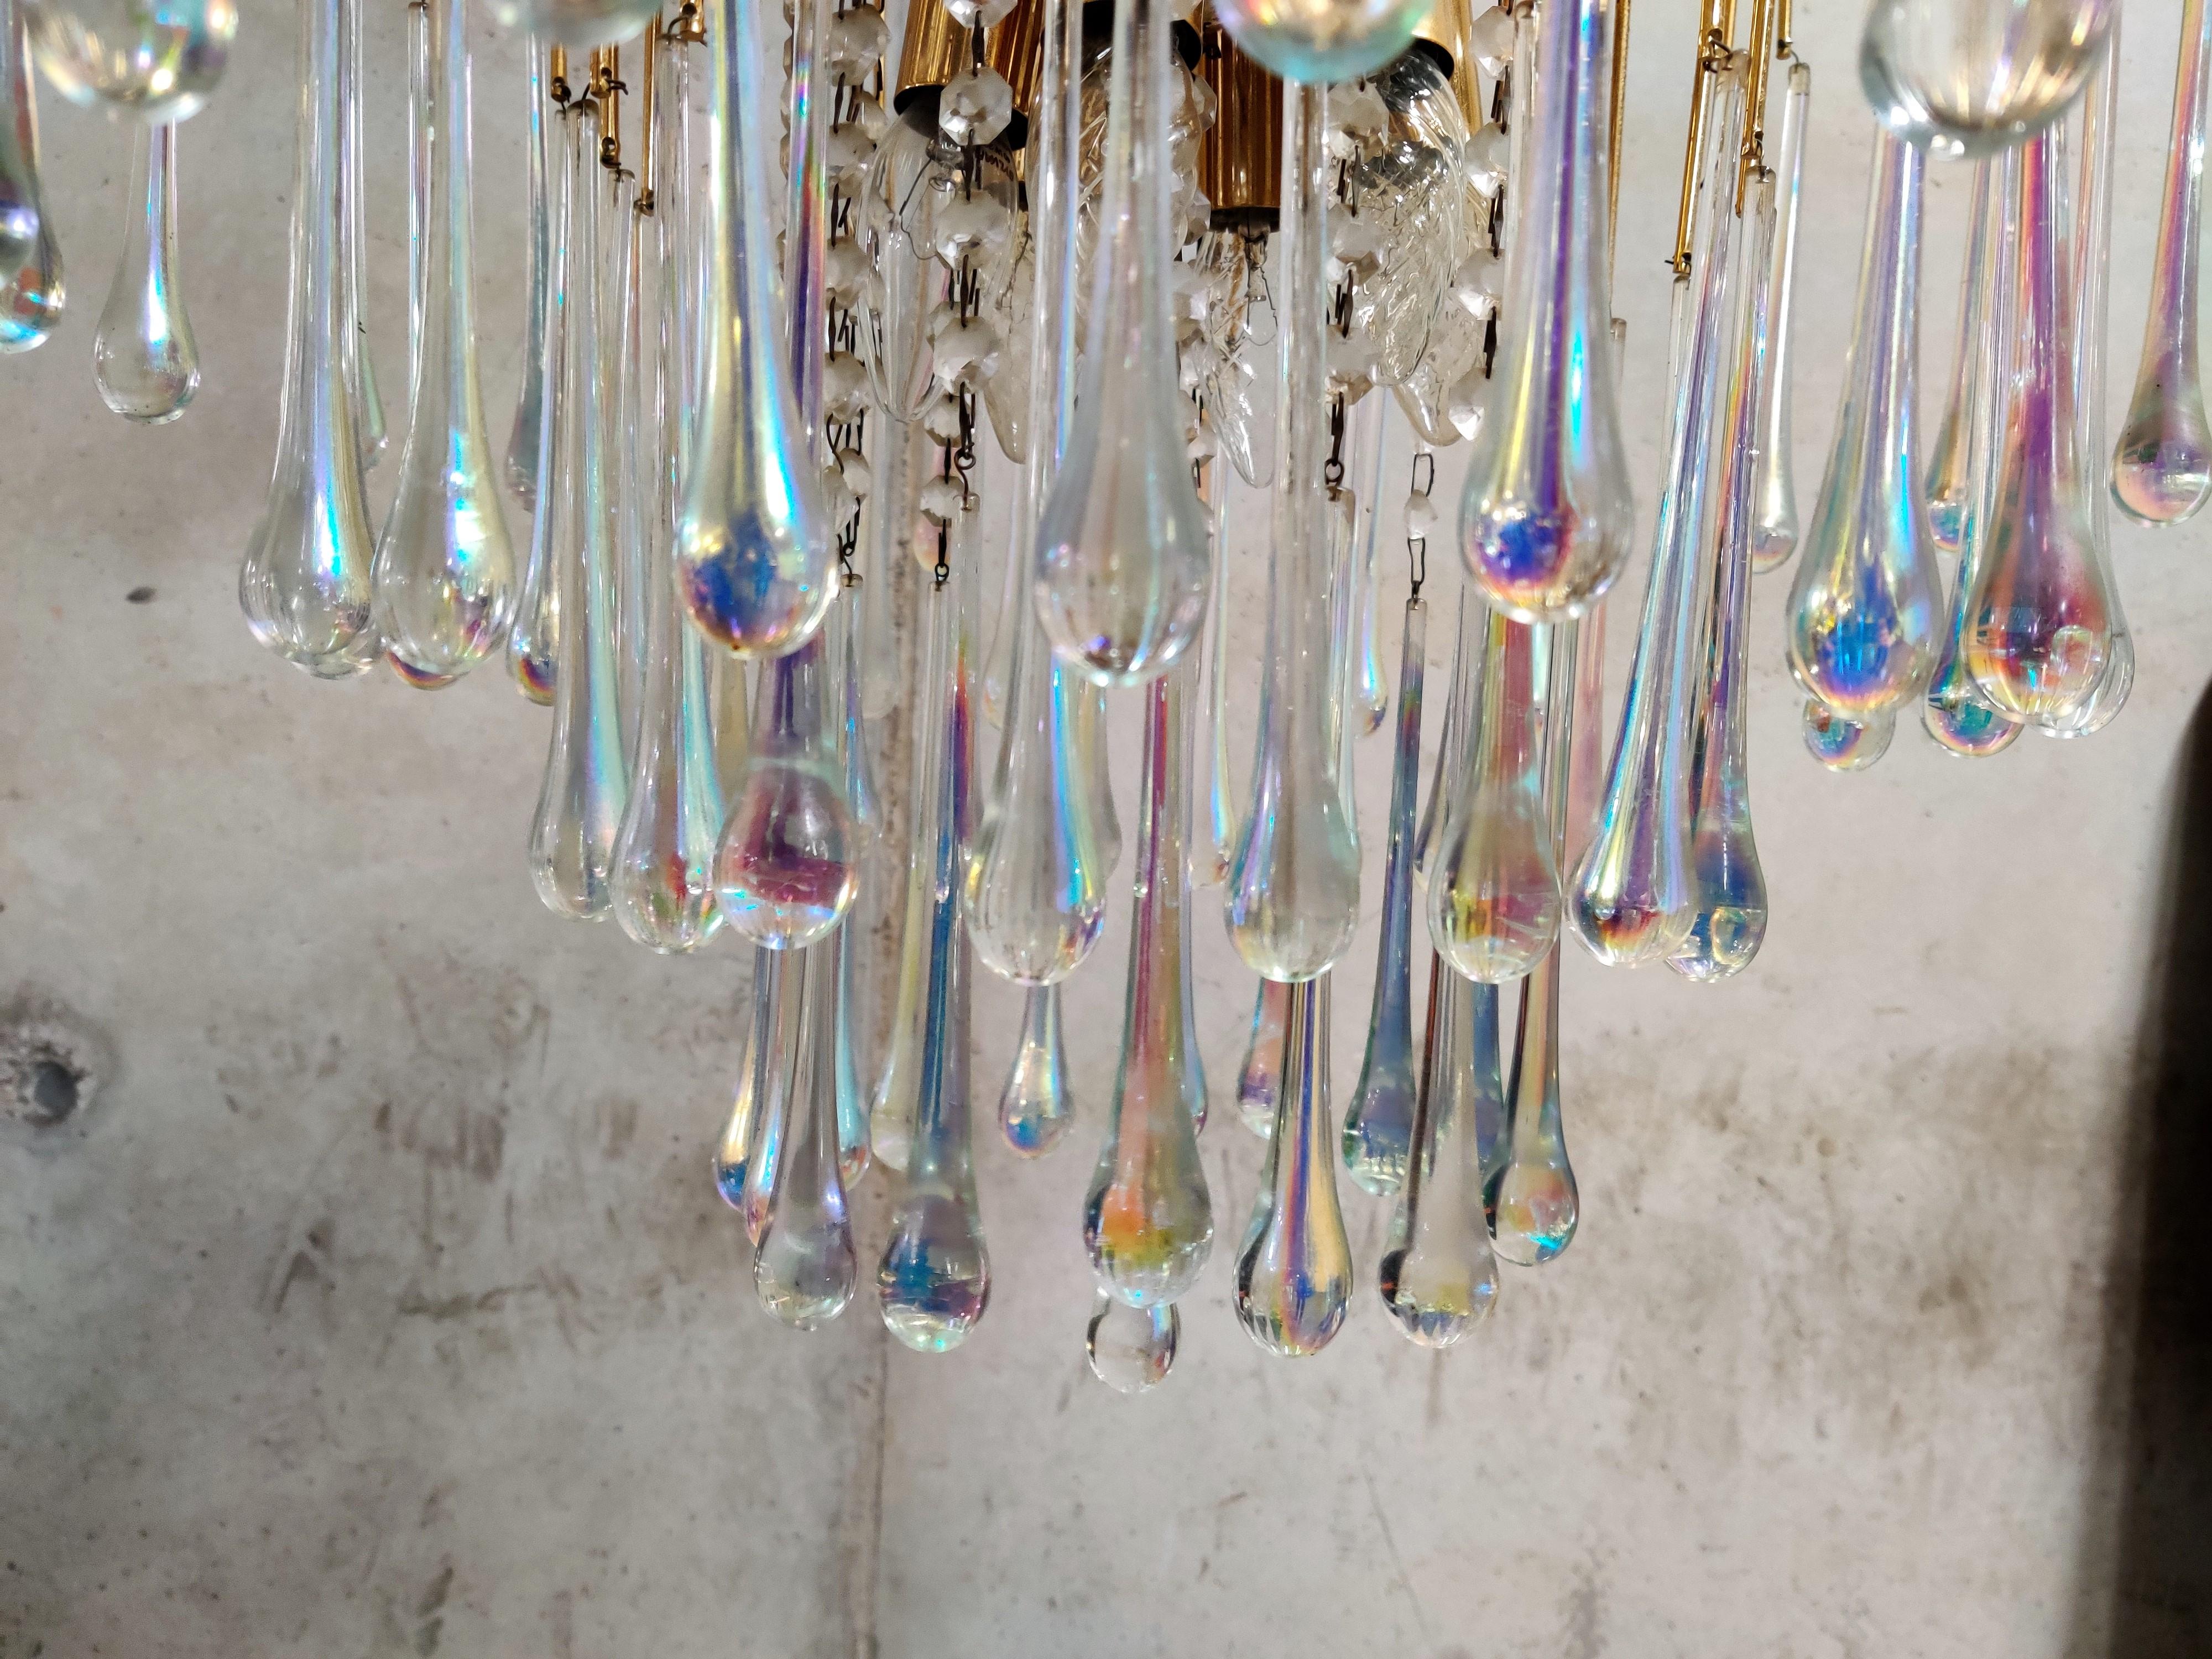 Elegant brass and Murano crystal chandelier.

The lamp is decorated with hand blown crystal Murano teardrop glasses.

The chandelier emits a stunning light.

The lamp is fitted with 6 E27 light sockets.

It comes with its original chain and